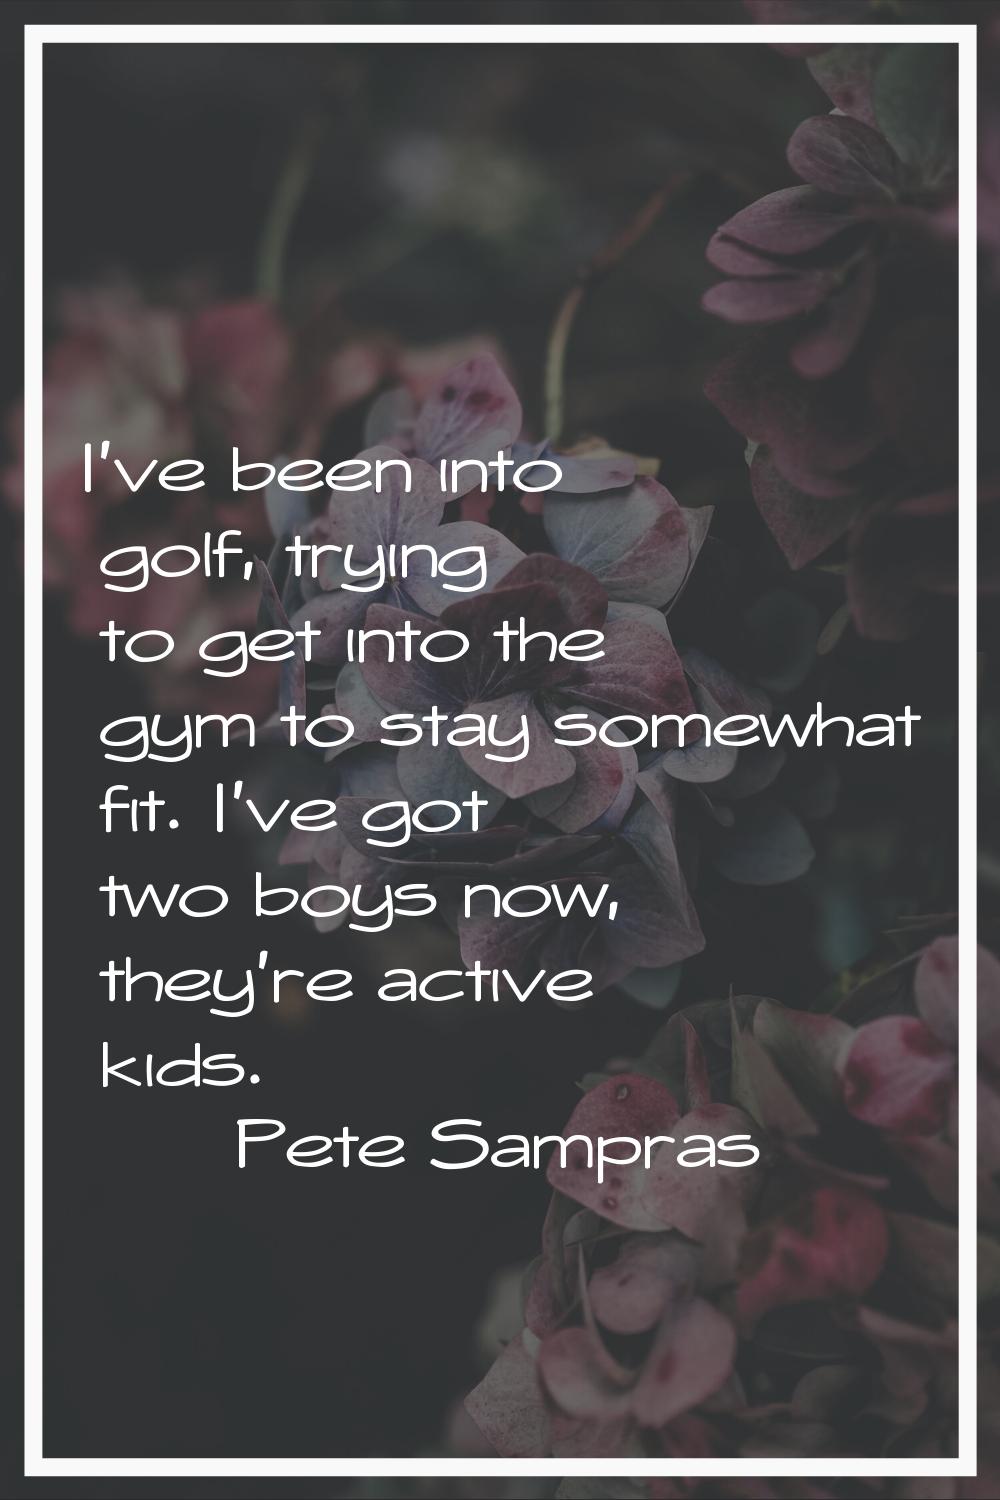 I've been into golf, trying to get into the gym to stay somewhat fit. I've got two boys now, they'r